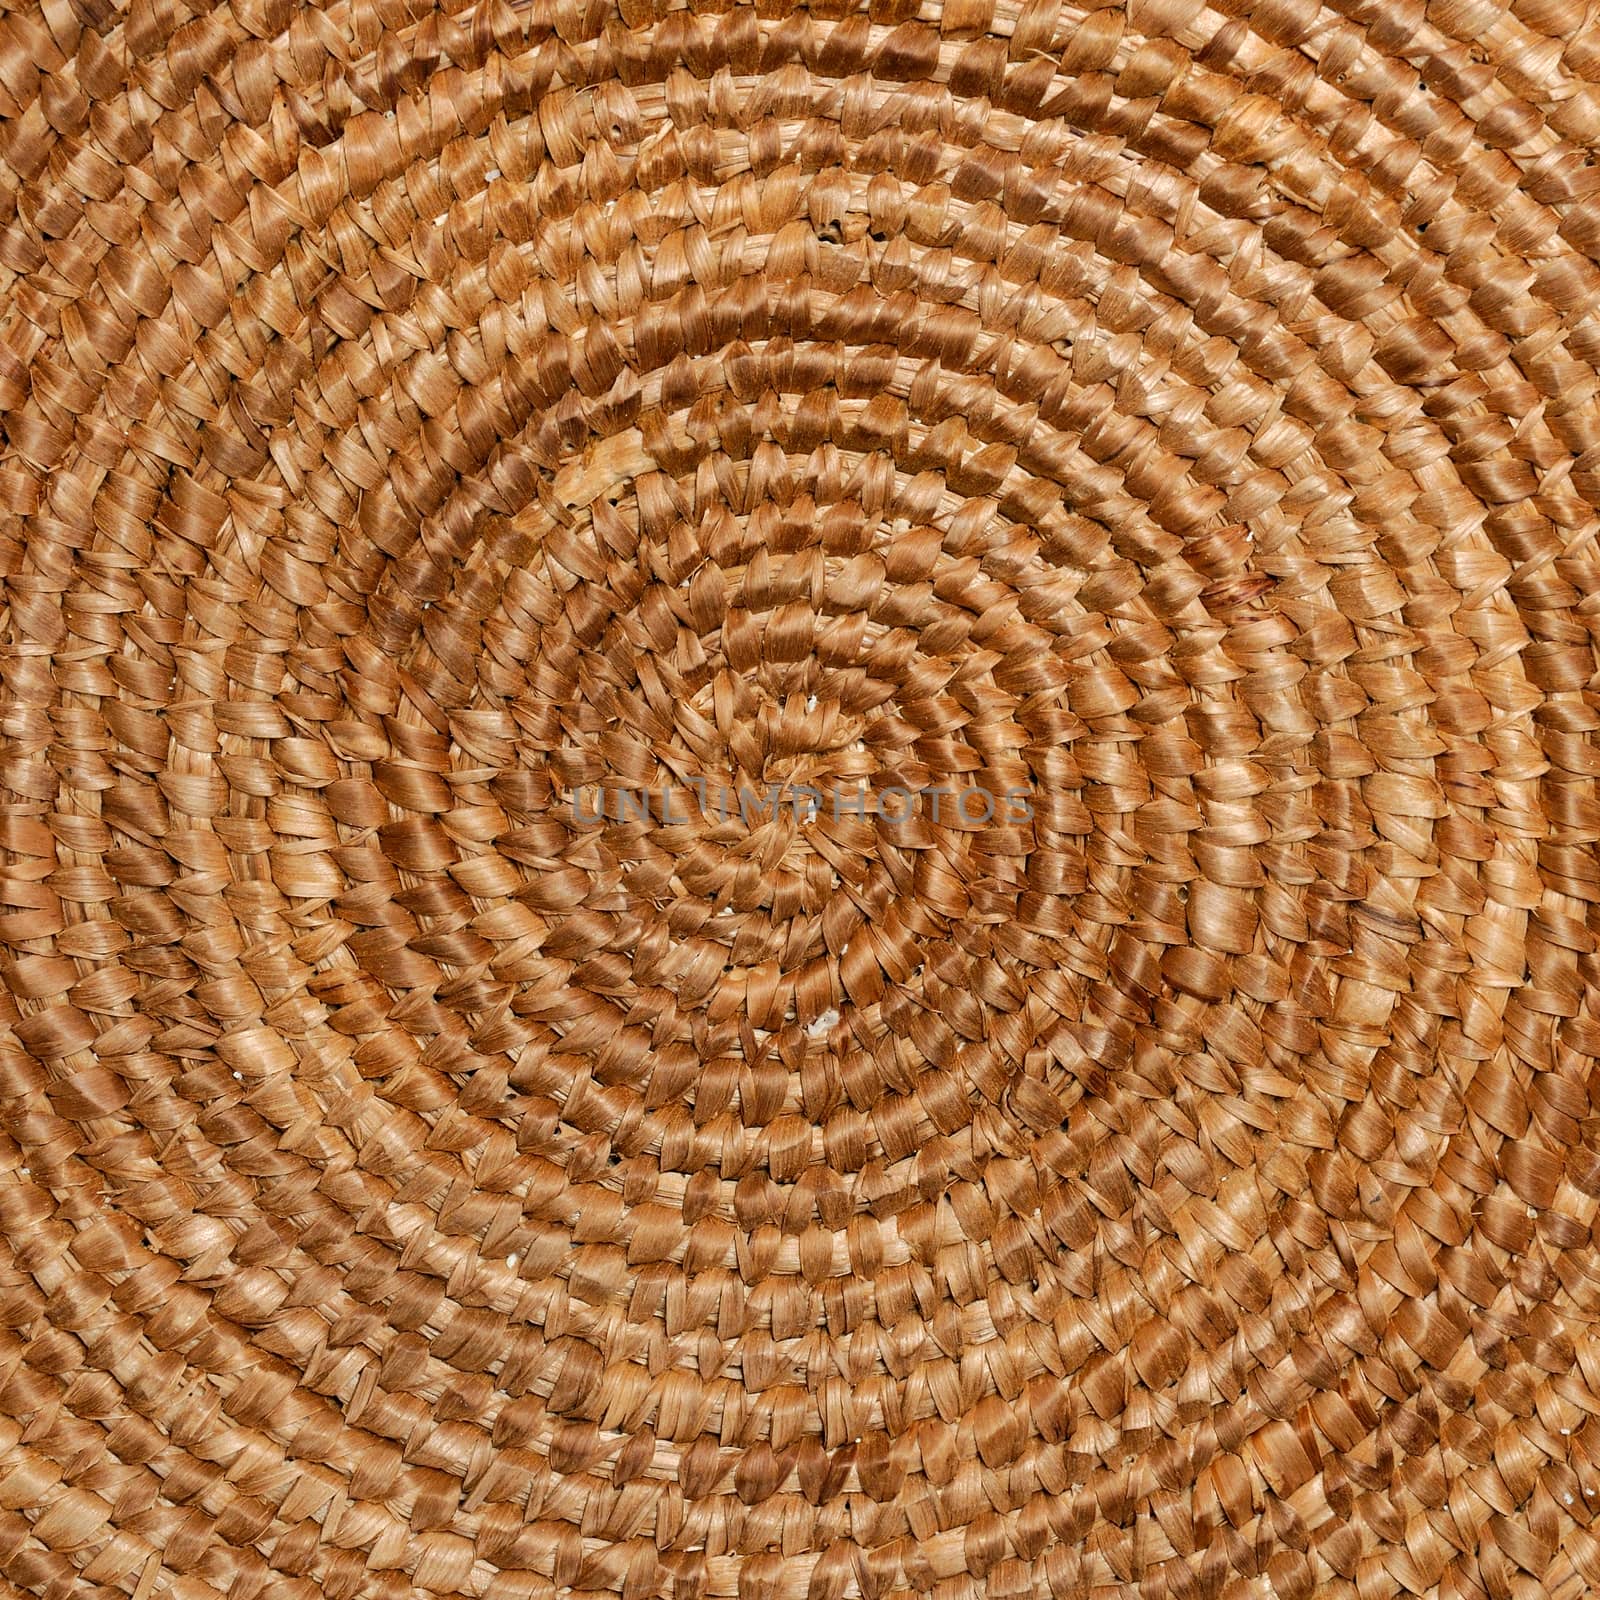 Concentric circles of a wicker basket, traditional Sardinian cuisine.